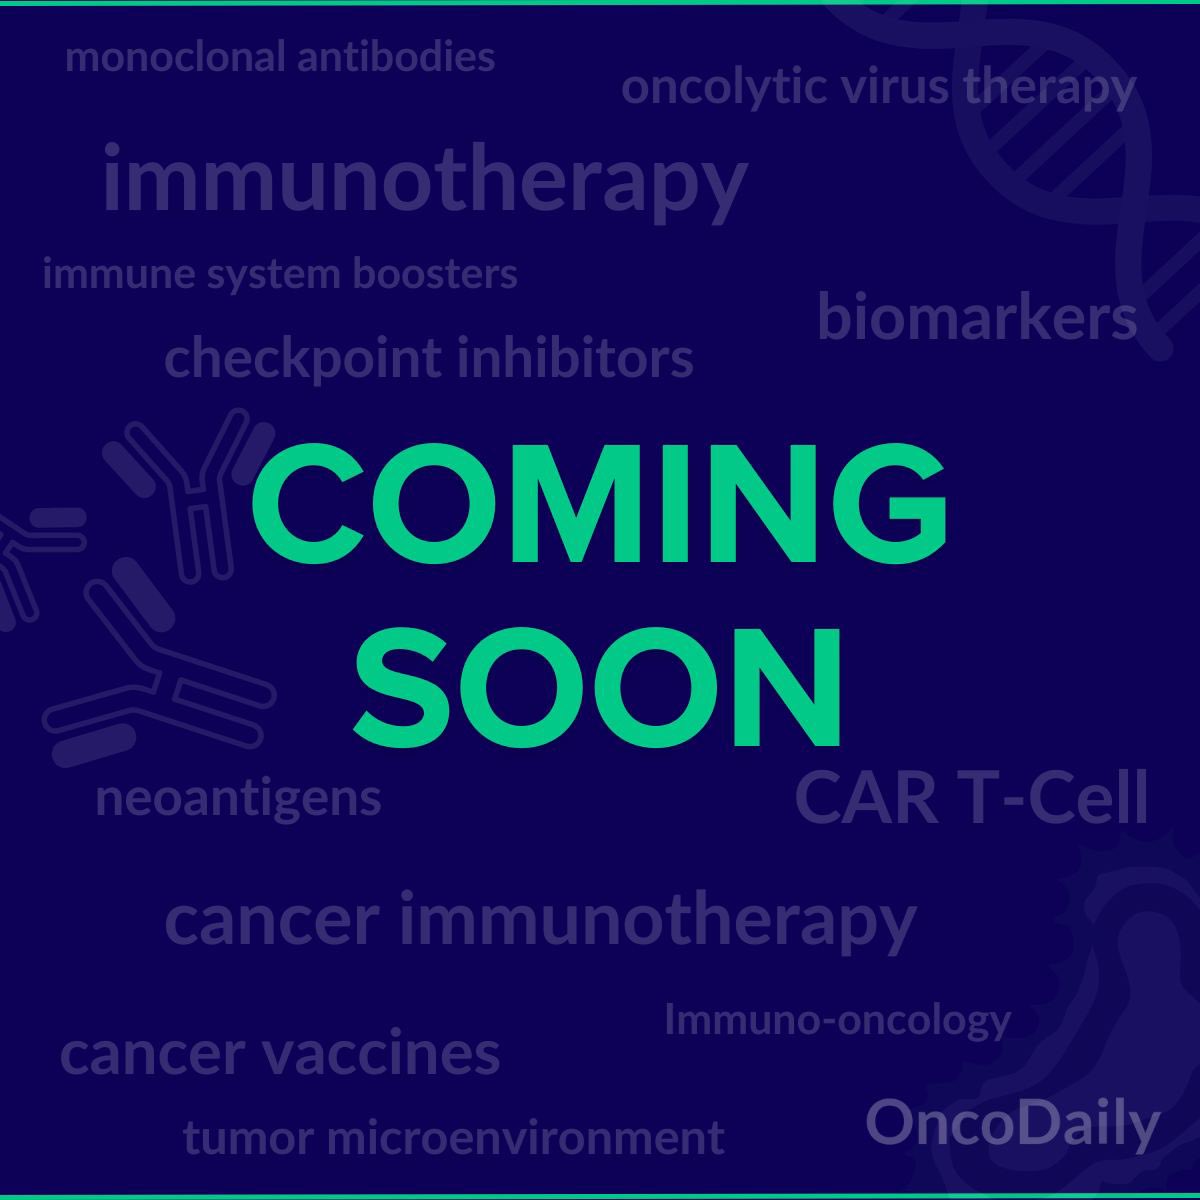 📢✨Exciting news! We at #OncoDaily are launching a comprehensive series of articles on Cancer Immunotherapy, bringing the most up-to-date, evidence-based information to patients and caregivers. 

We would also welcome input from oncologists and other healthcare professionals.